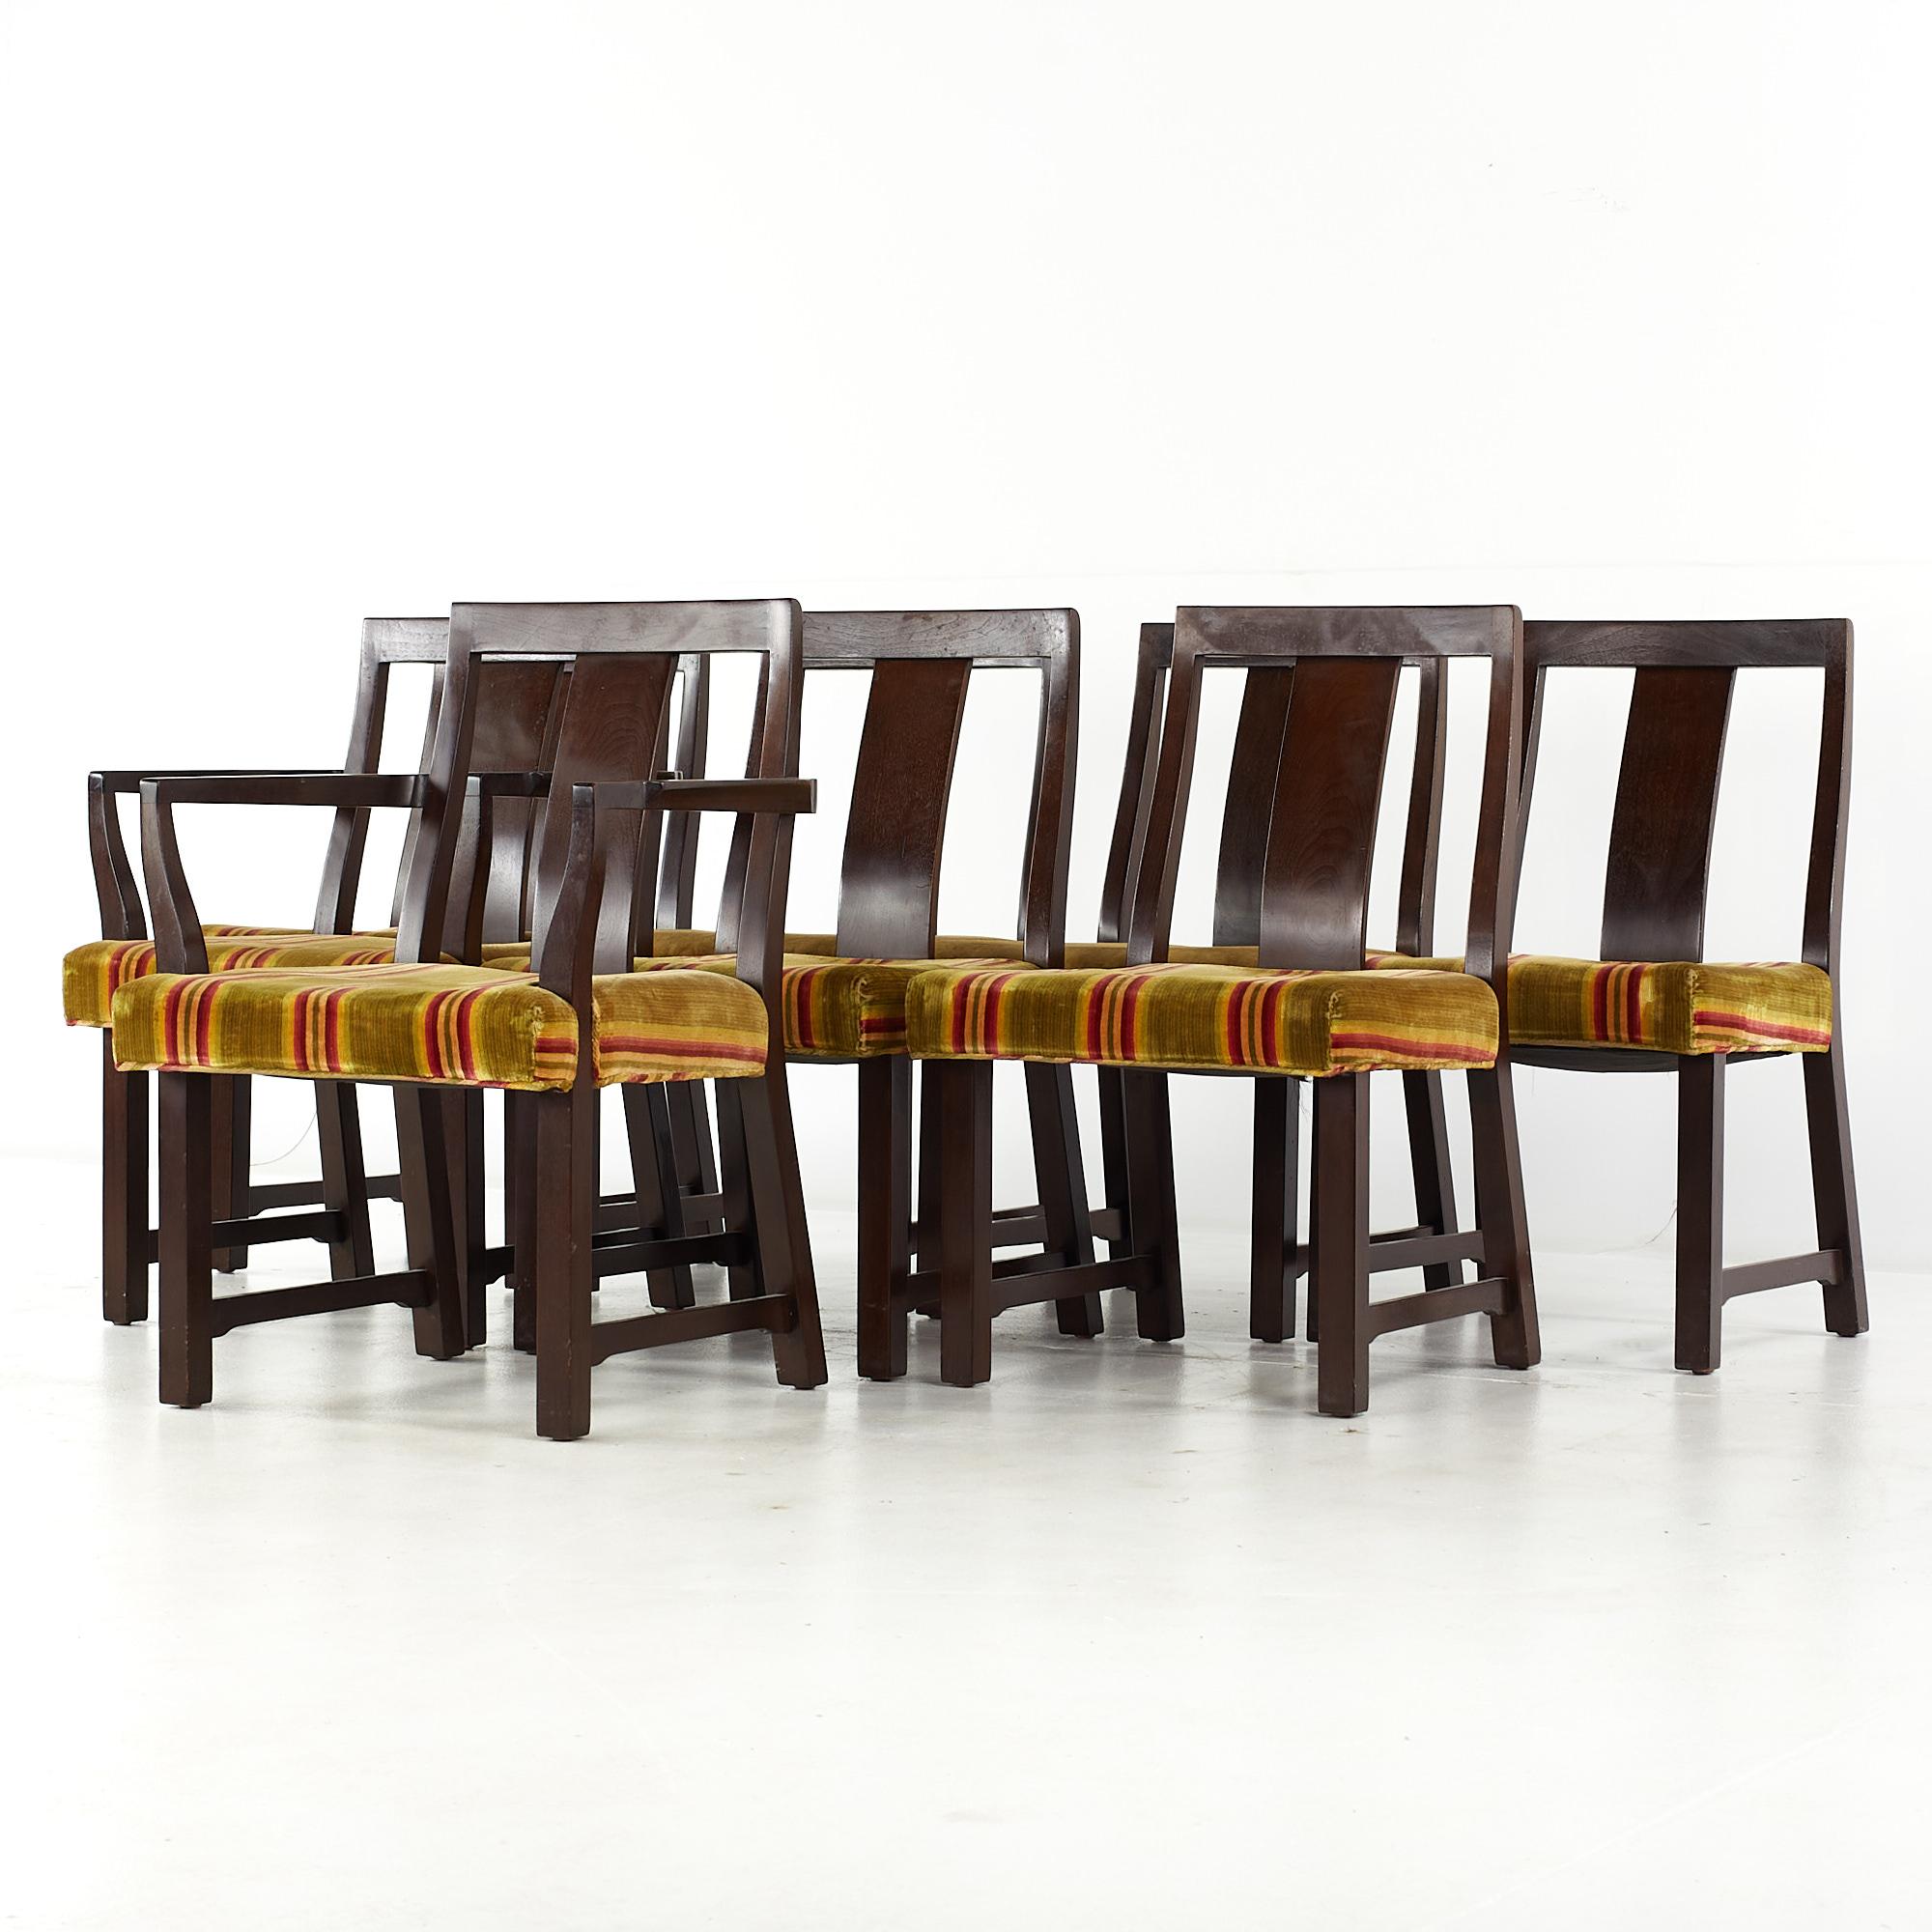 Mid-Century Modern Edward Wormley for Dunbar Mid Century Mahogany Dining Chairs, Set of 8 For Sale